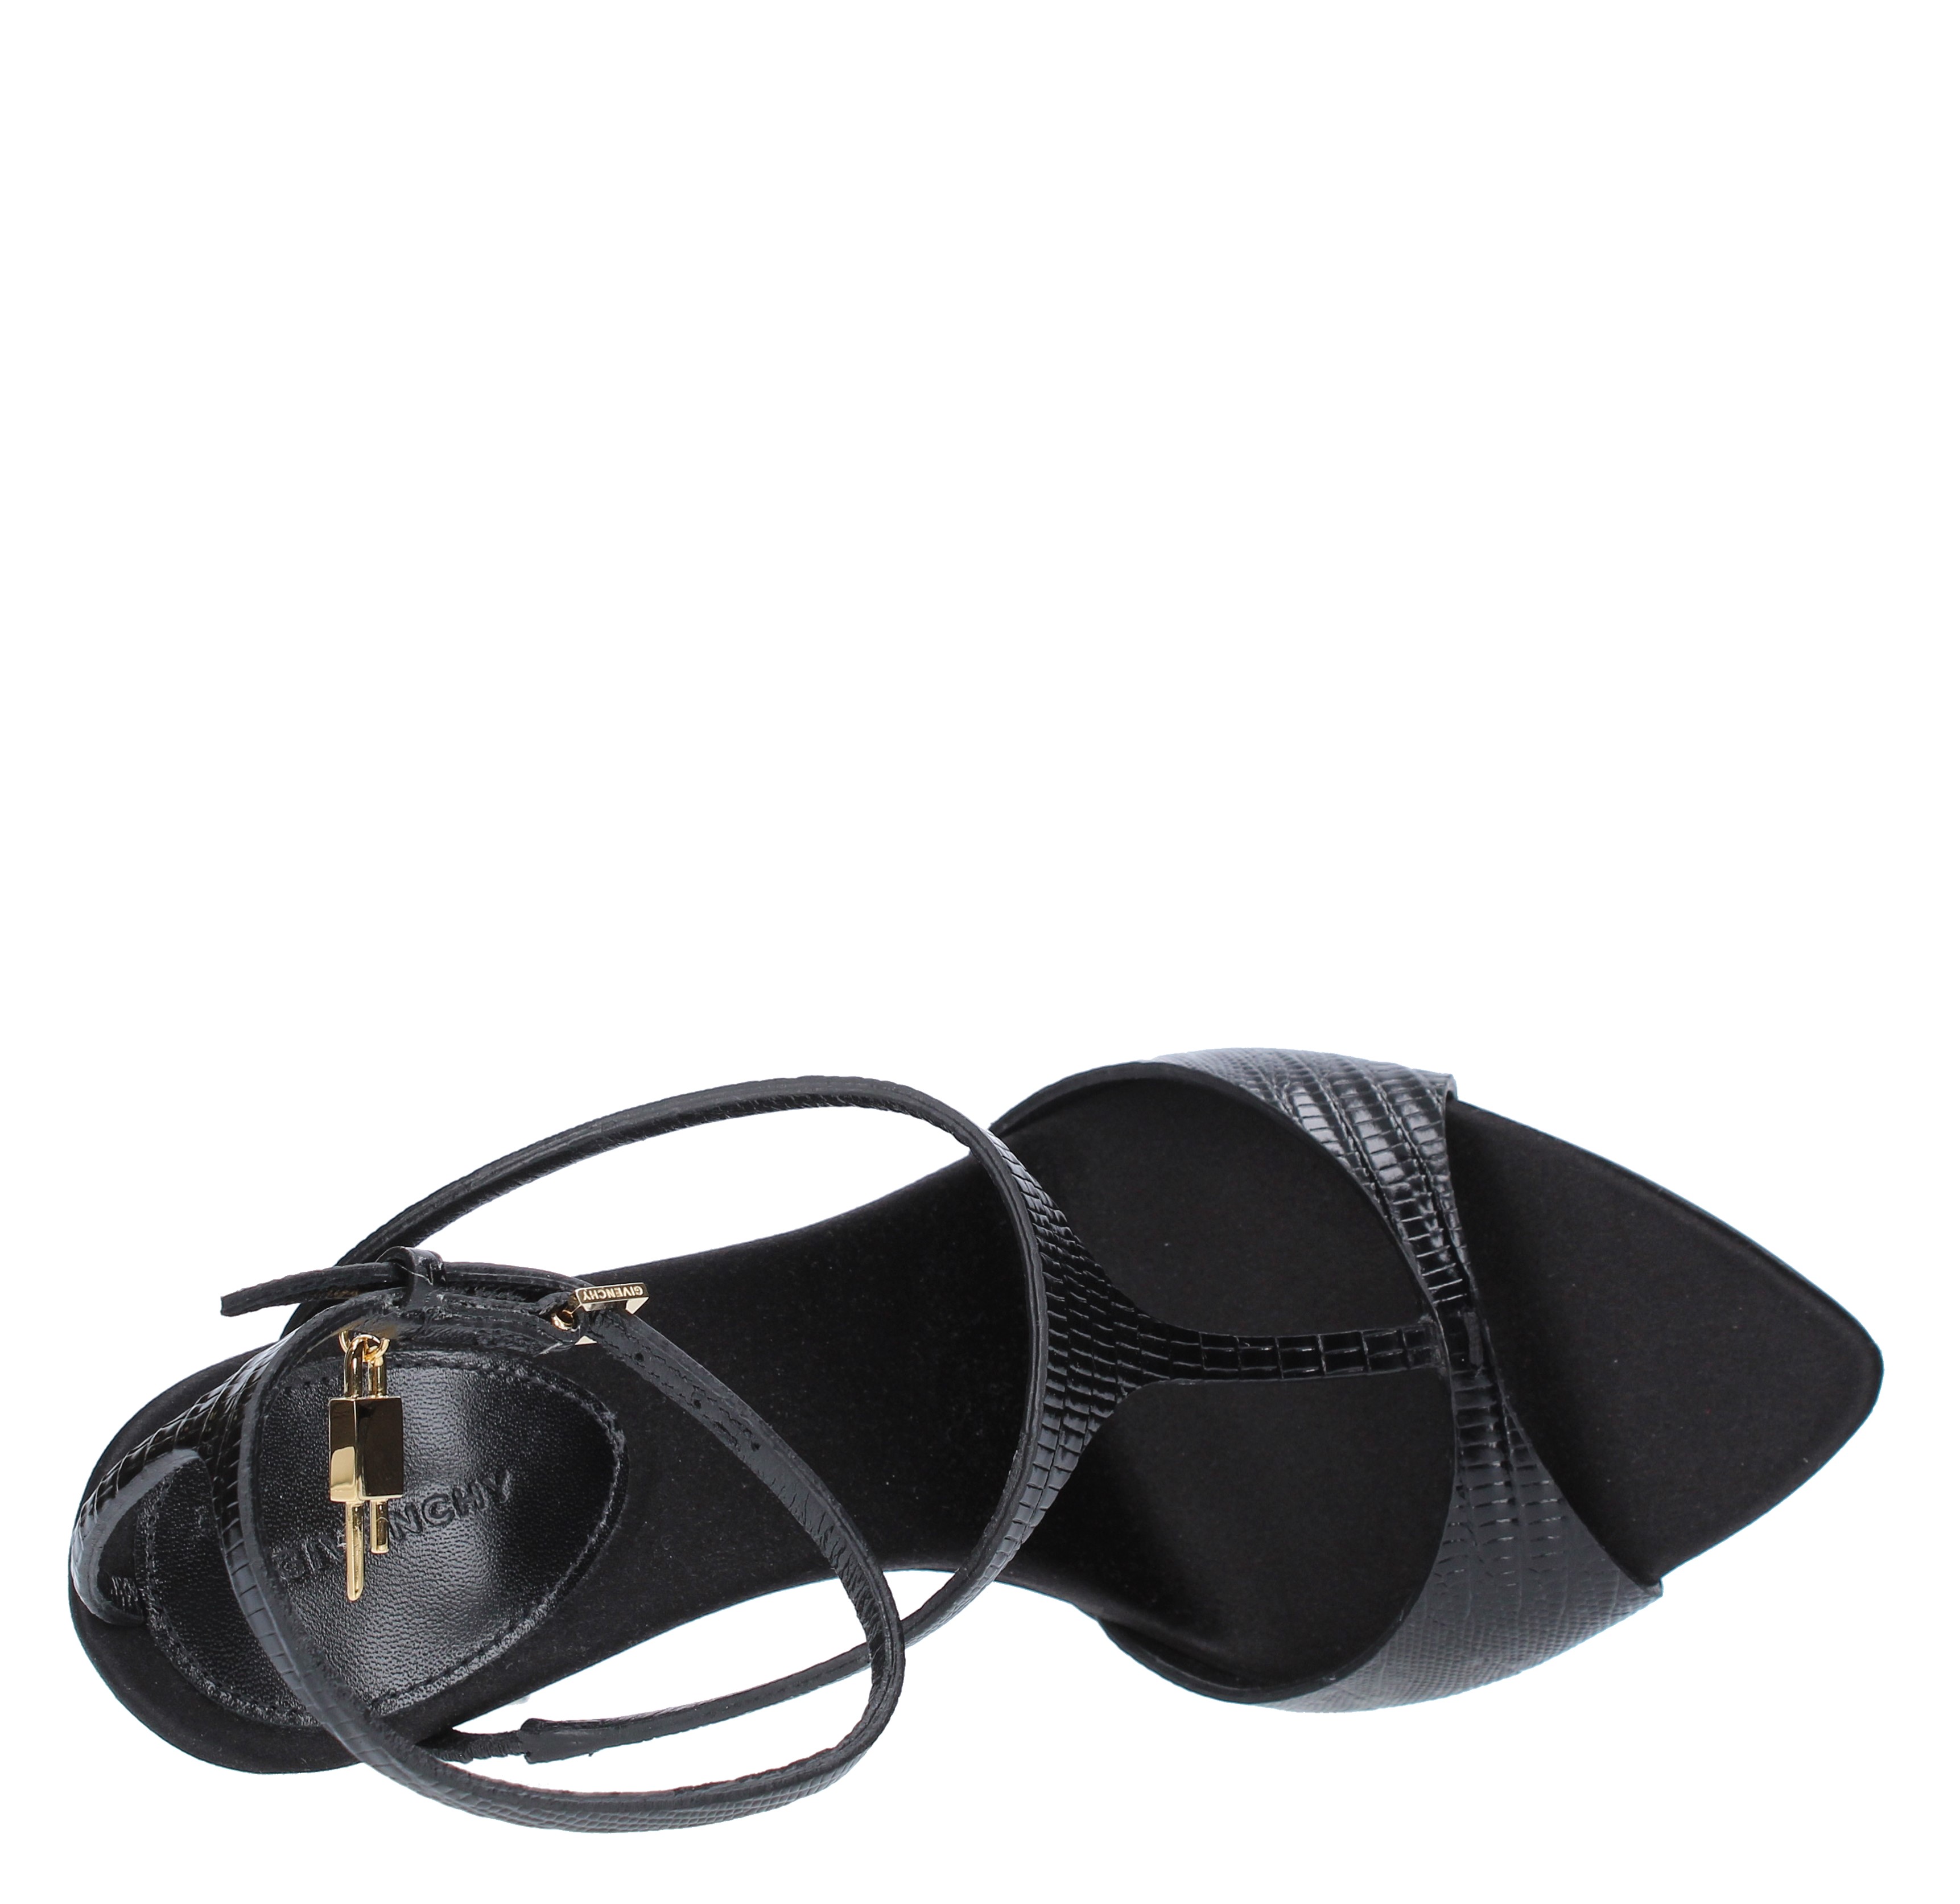 G LOCK GIVENCHY sandals in leather - GIVENCHY - Ginevra calzature